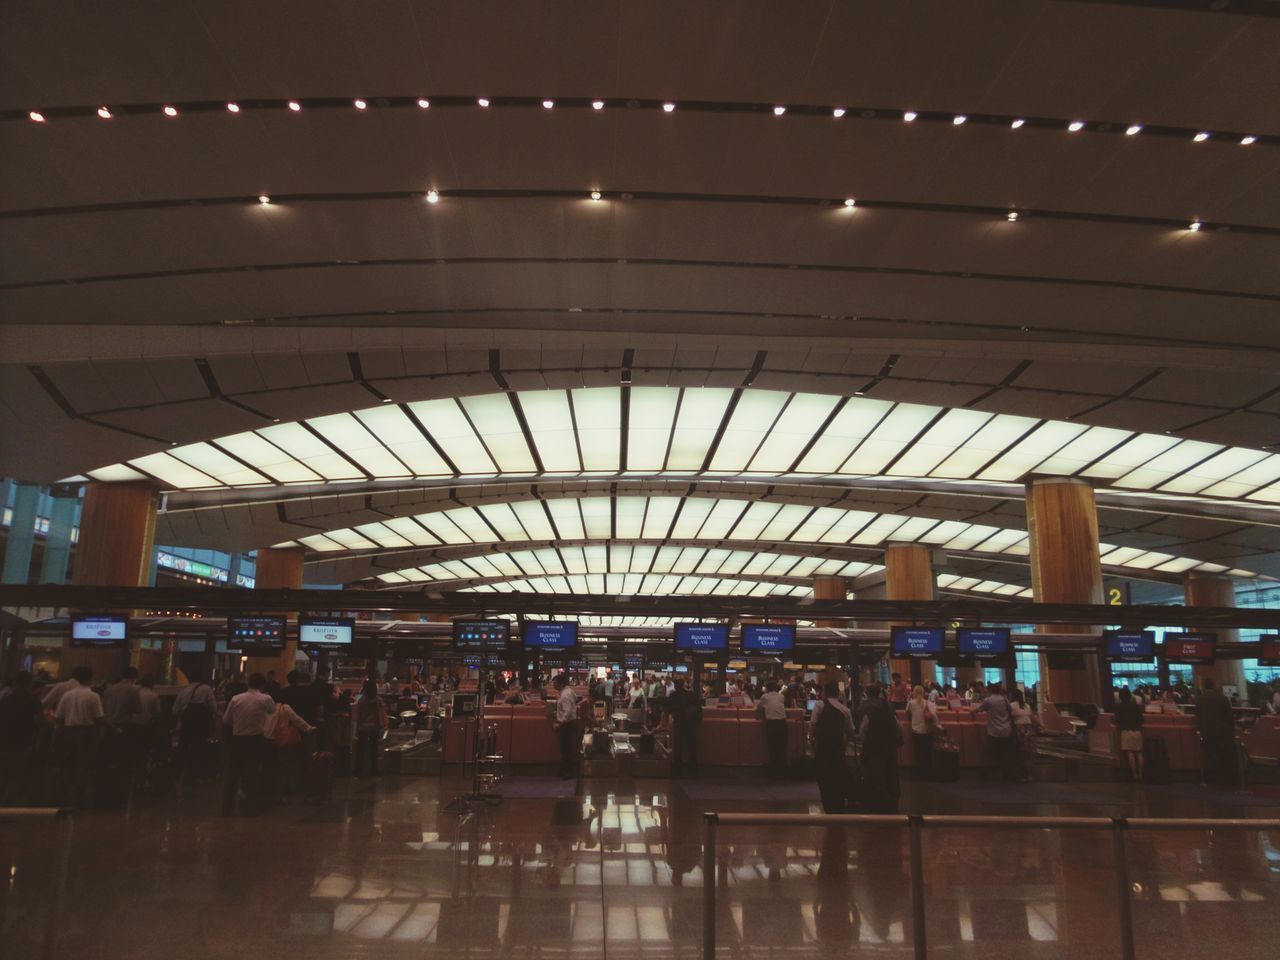 illuminated, indoors, ceiling, lighting equipment, night, large group of people, men, lifestyles, in a row, person, leisure activity, built structure, modern, electric light, airport, light, light - natural phenomenon, repetition, architecture